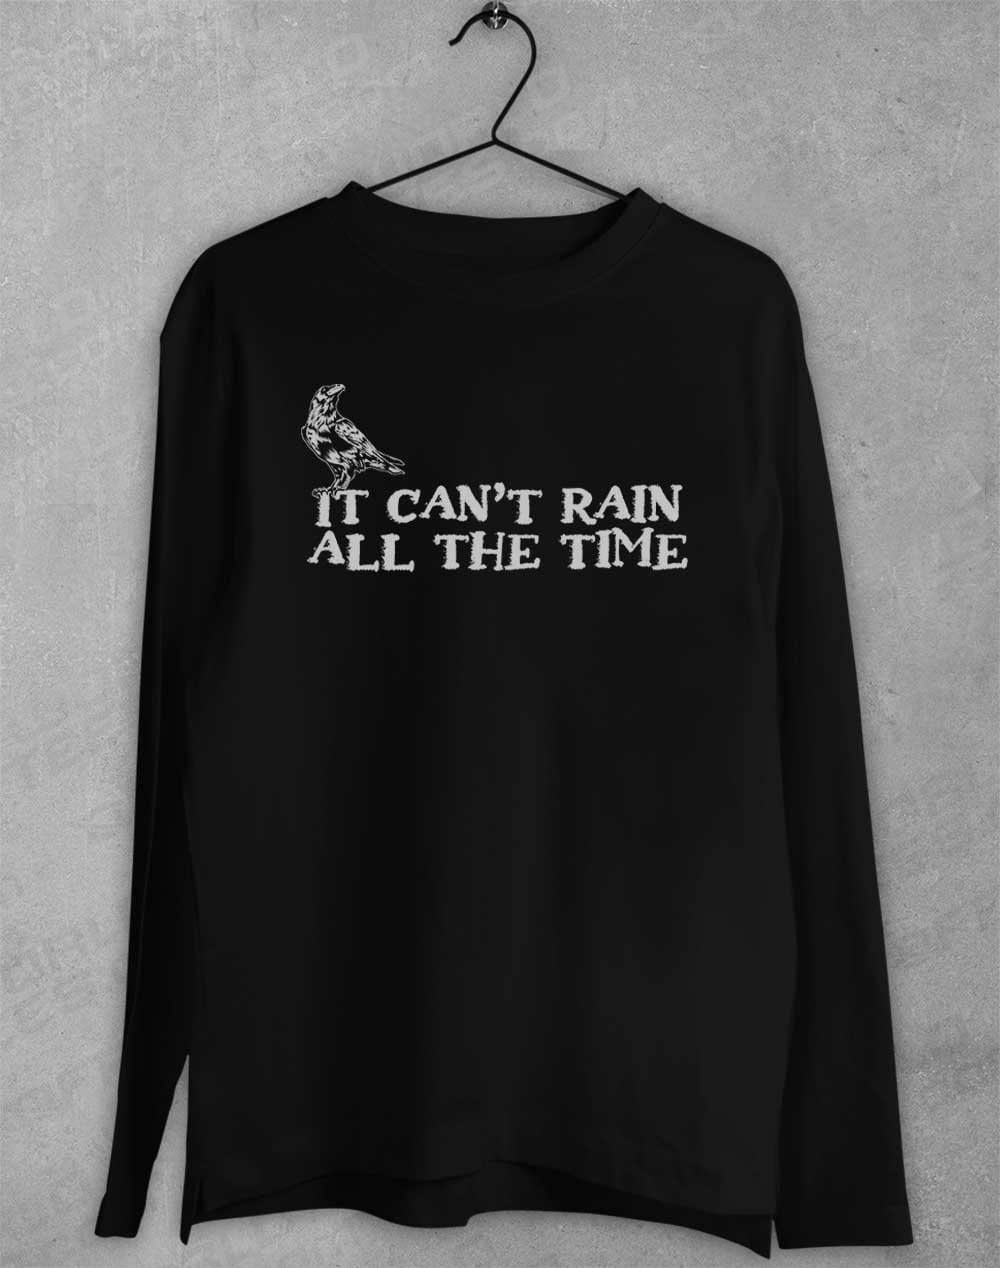 It Can't Rain All the Time Long Sleeve T-Shirt S / Black  - Off World Tees